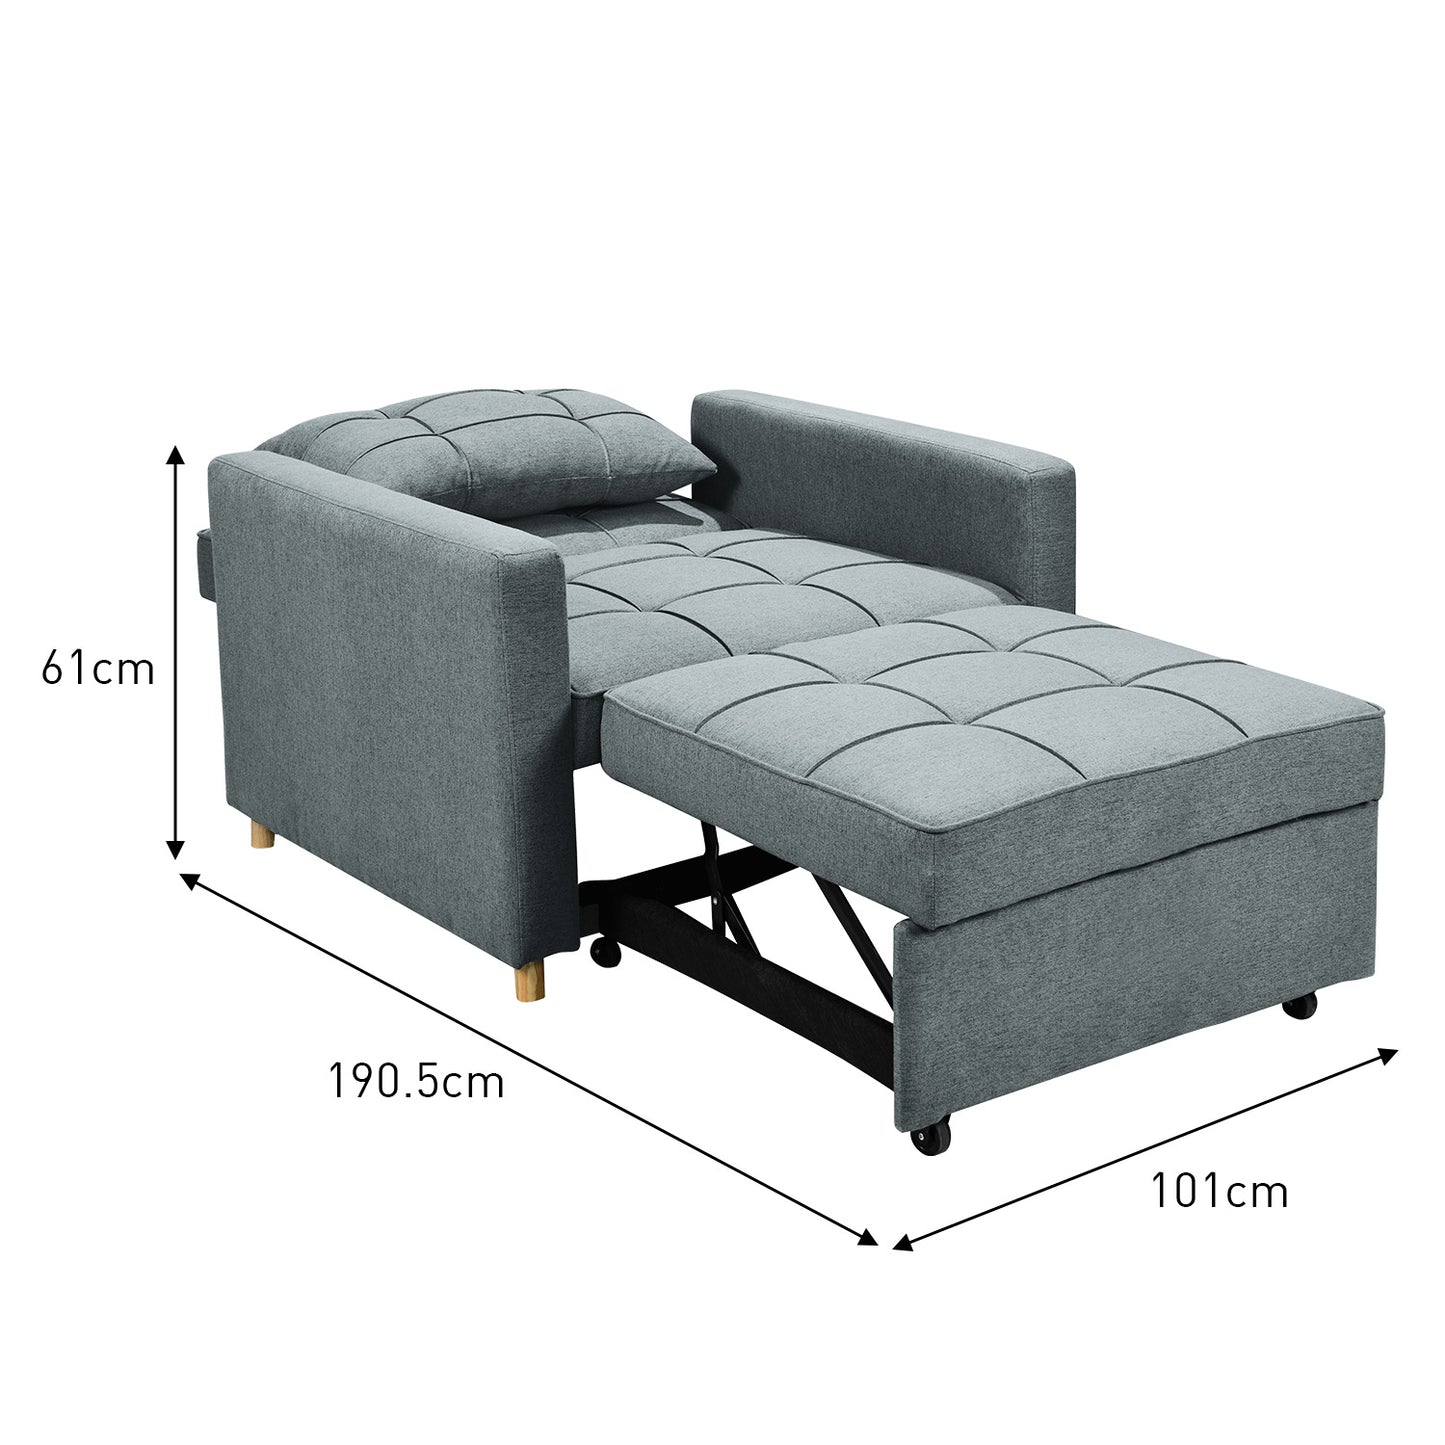 Millicent 3-in-1 Convertible Sofa Chair Bed - Grey